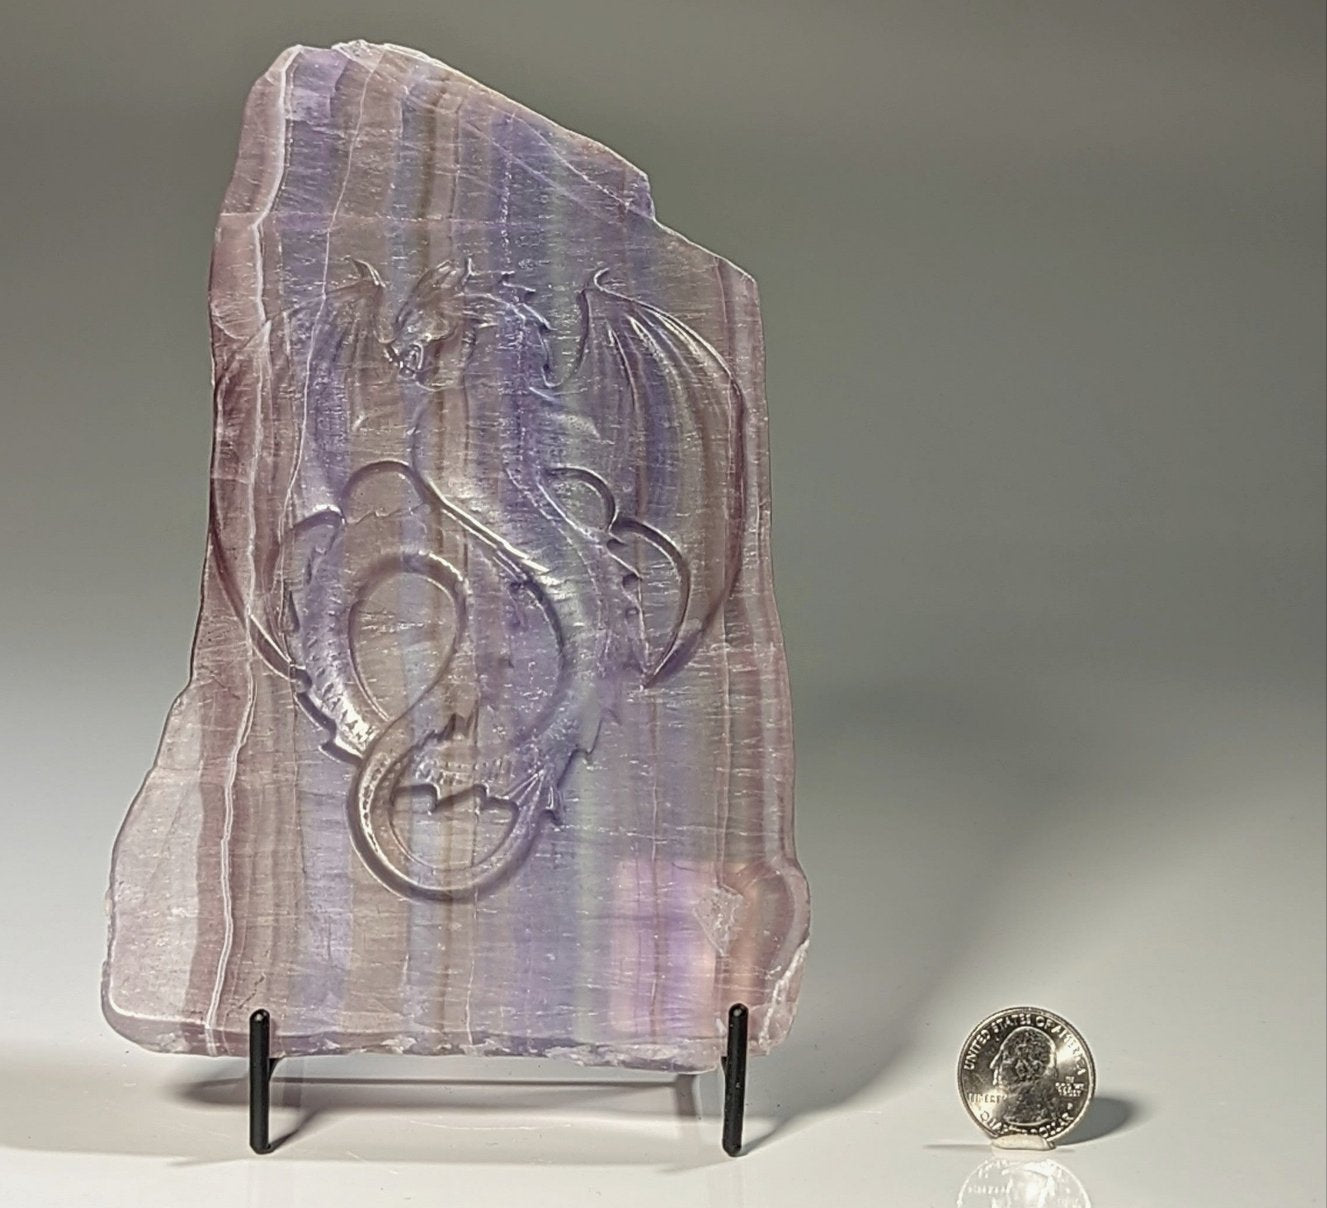 Lavender Fluorite Slab with Carved Dragon Etching Statement Piece